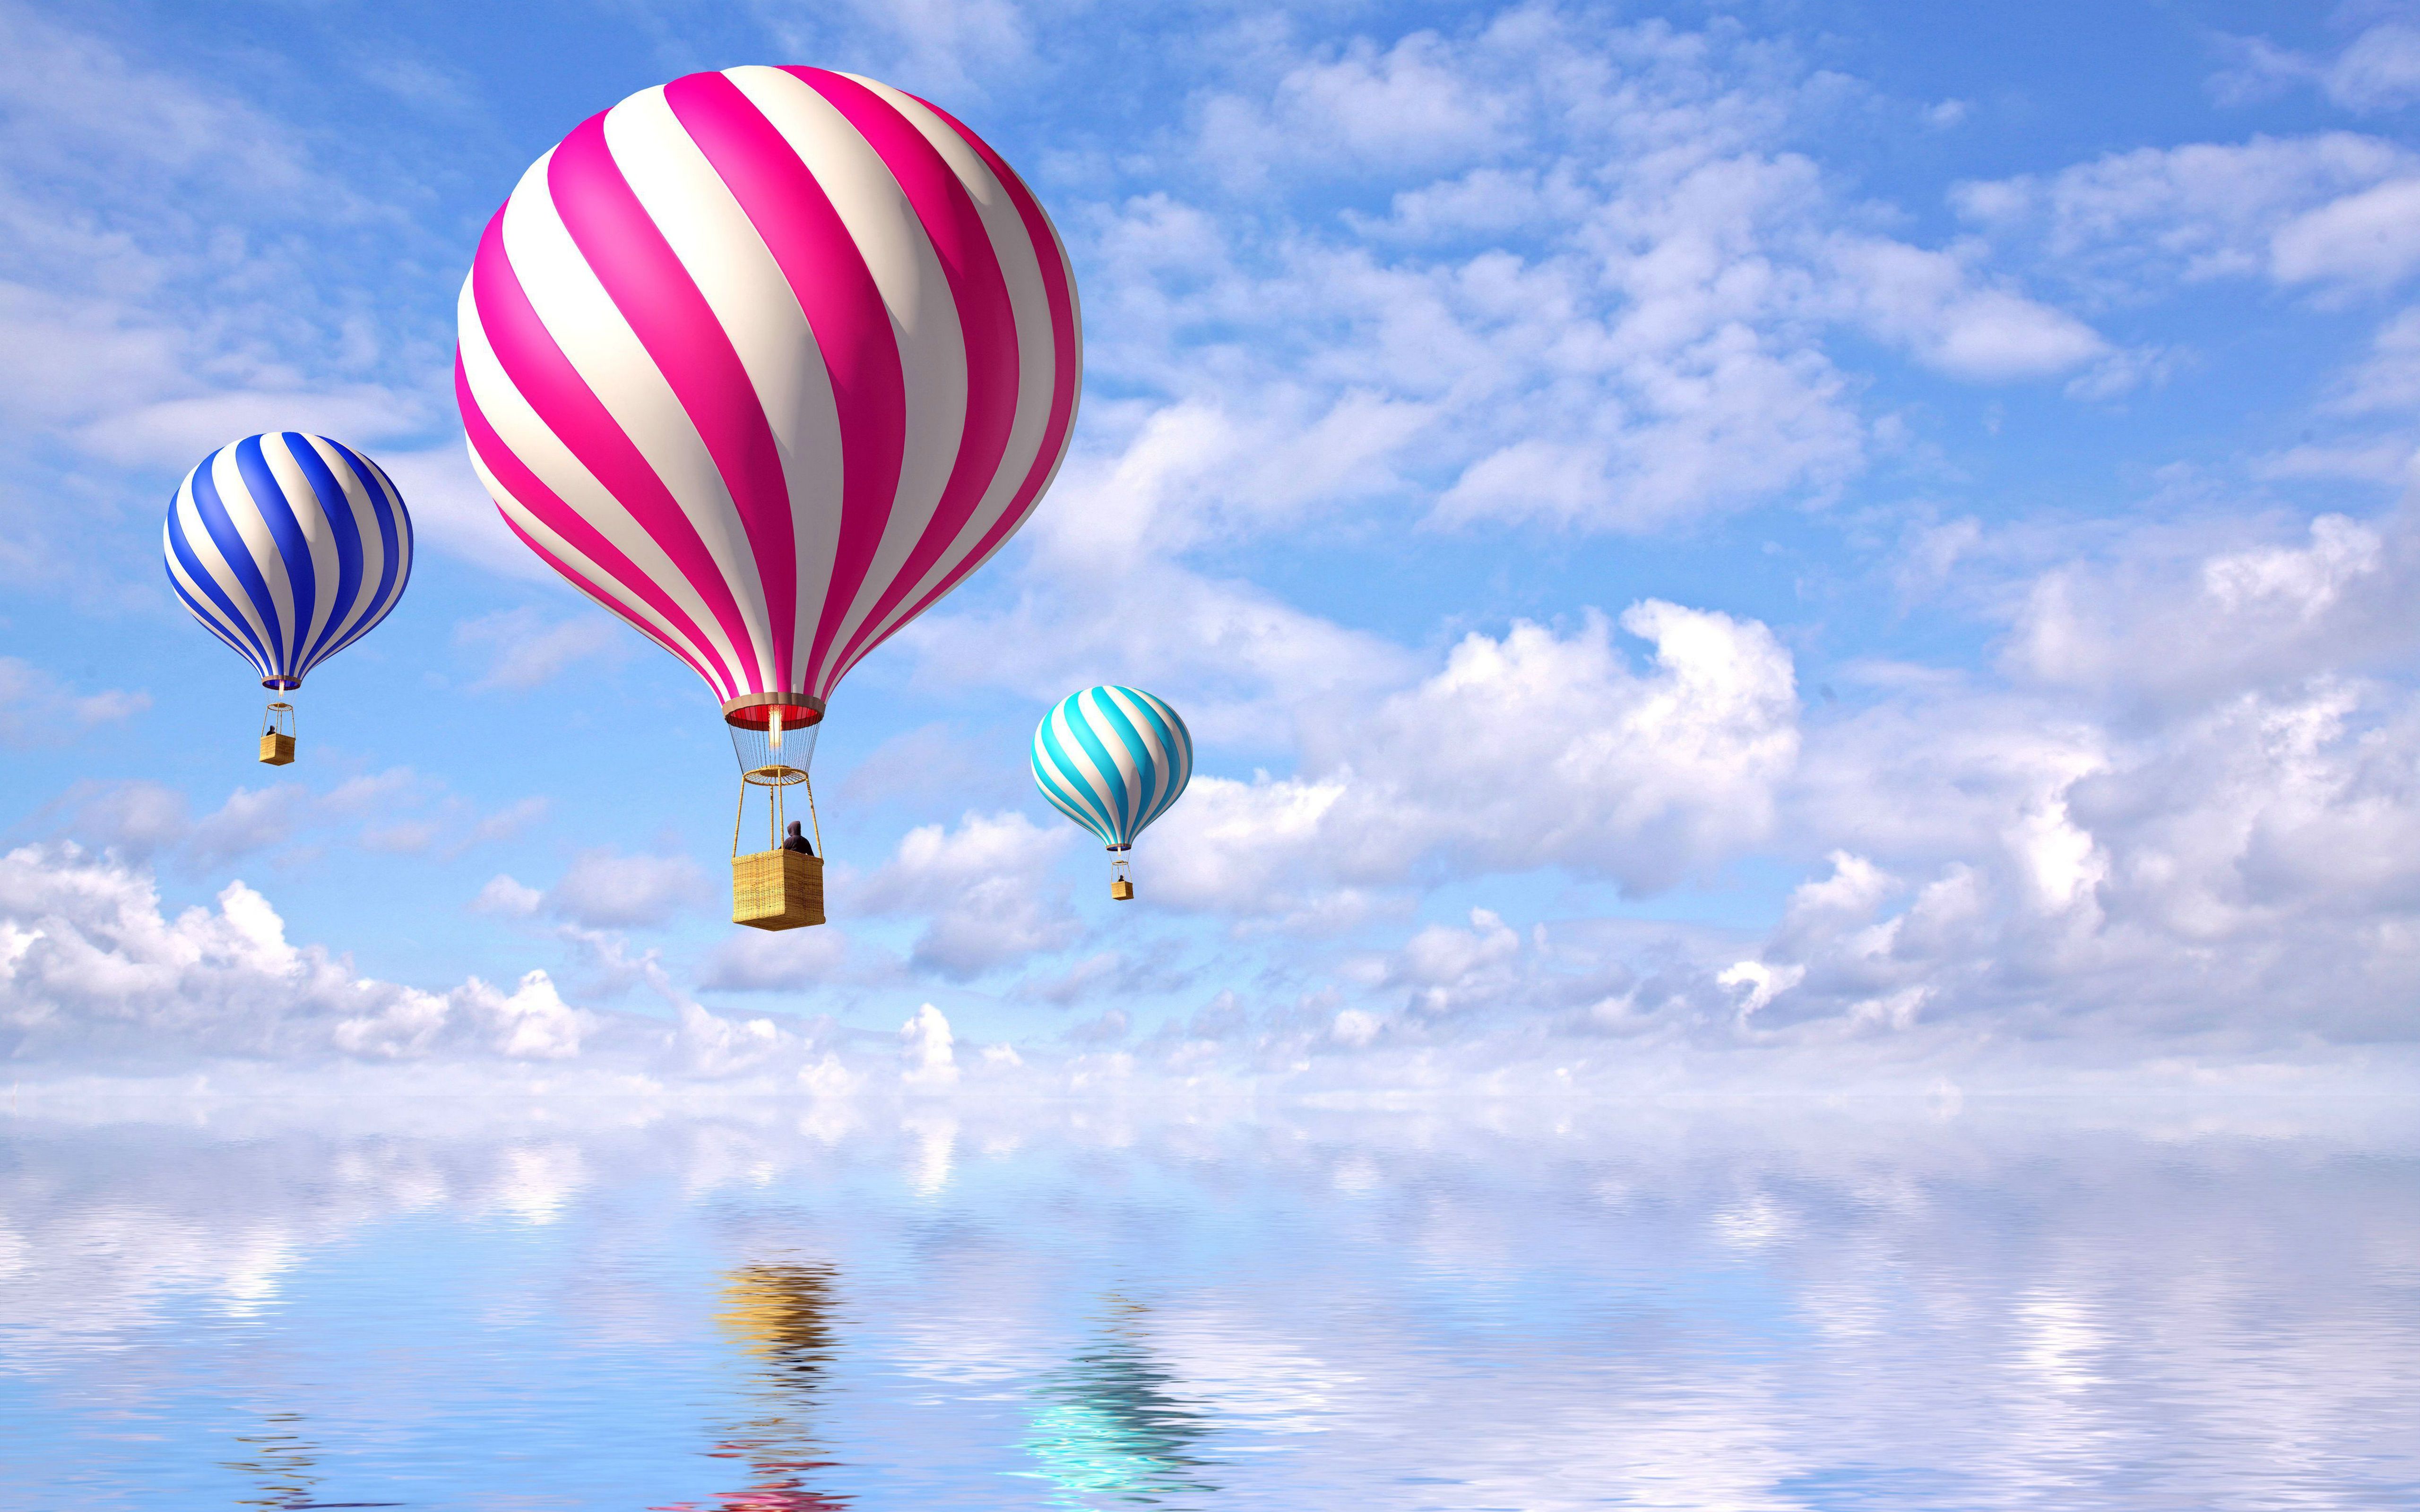 Hot Air Balloons can do more than just walk on water